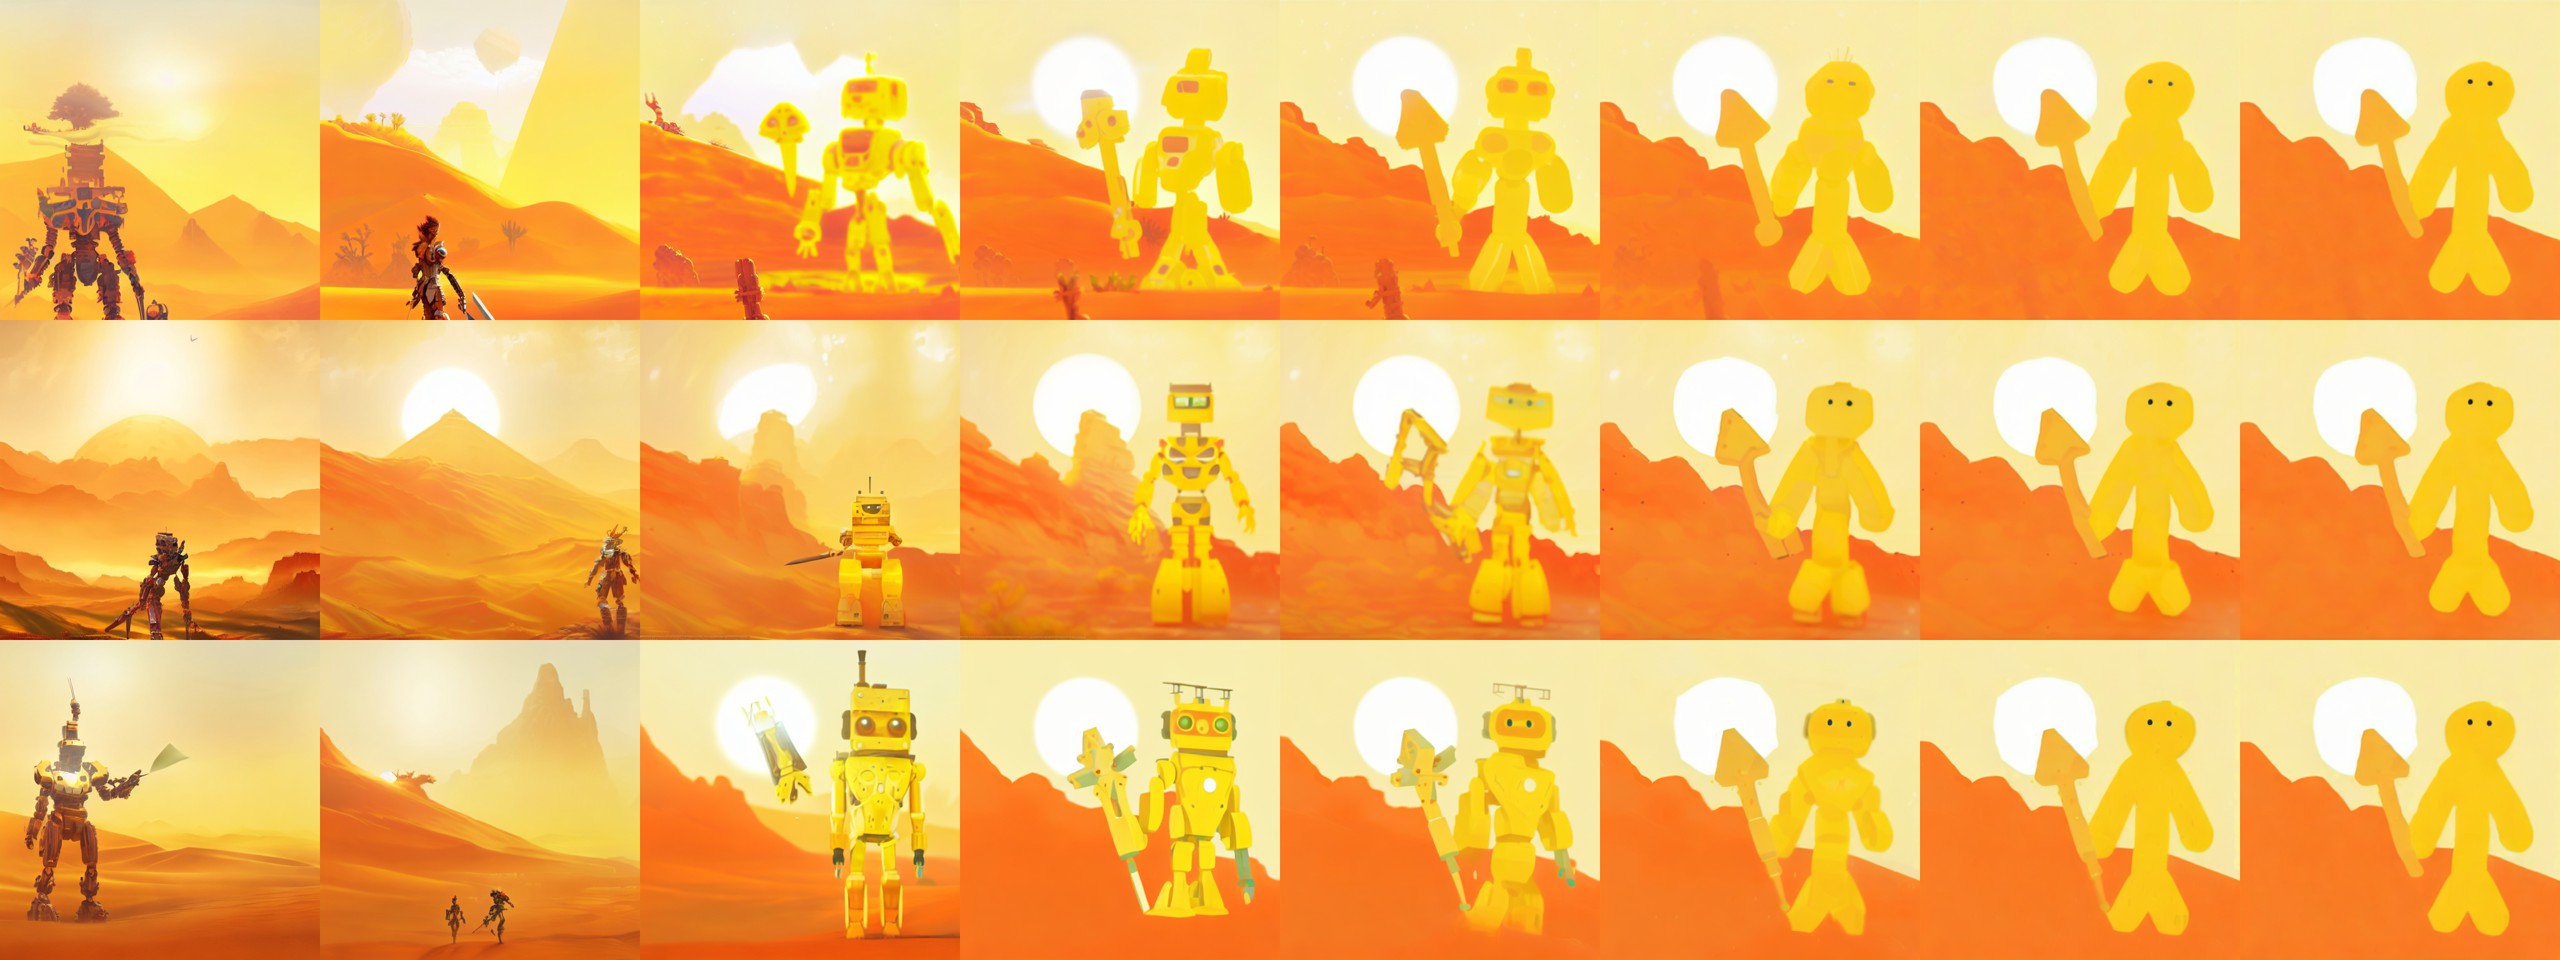 img2imgheavy_an_ancient_yellow_robot_holding_guy_1